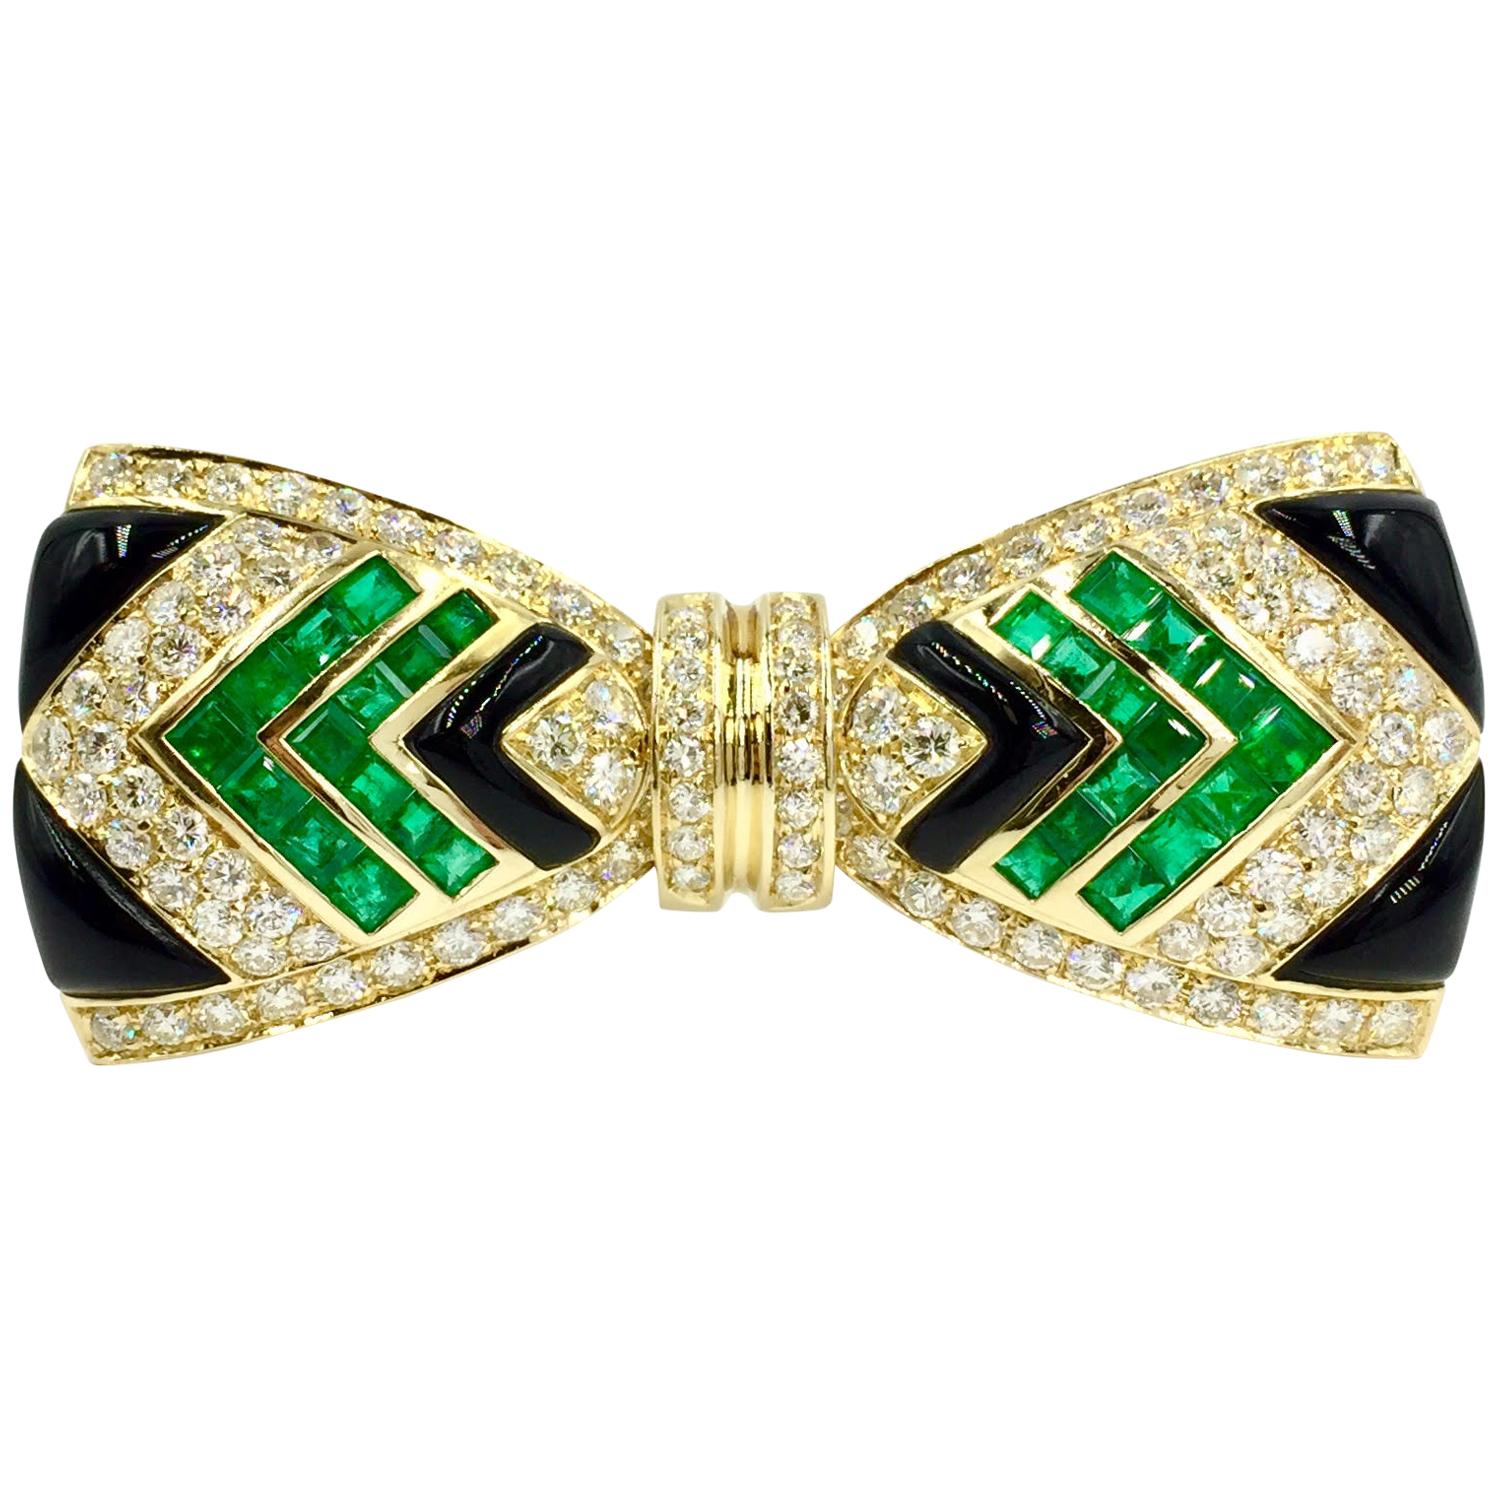 Diamond, Emerald and Onyx 18 Karat Large Bow Brooch by Giovane For Sale